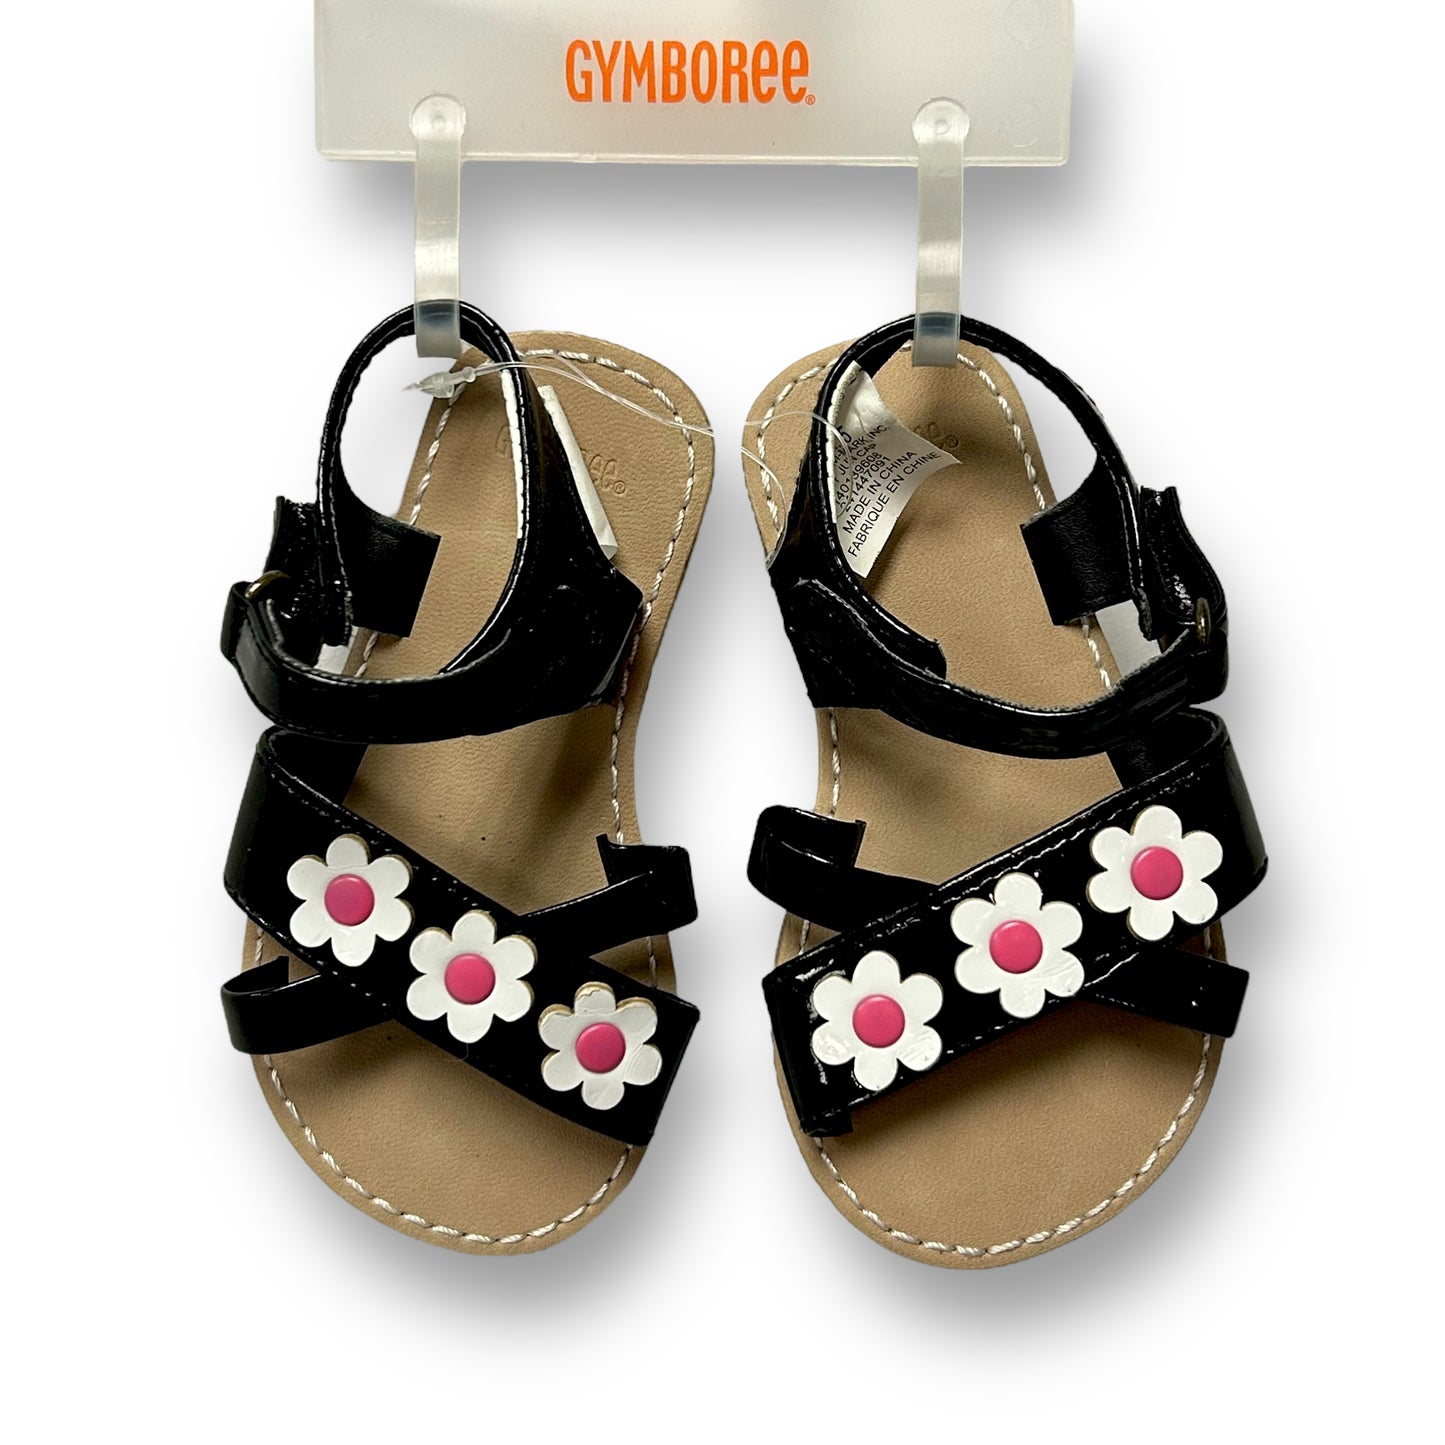 NEW! Gymboree Toddler Girl Size 5 Daisy Park Easy-On Sandals